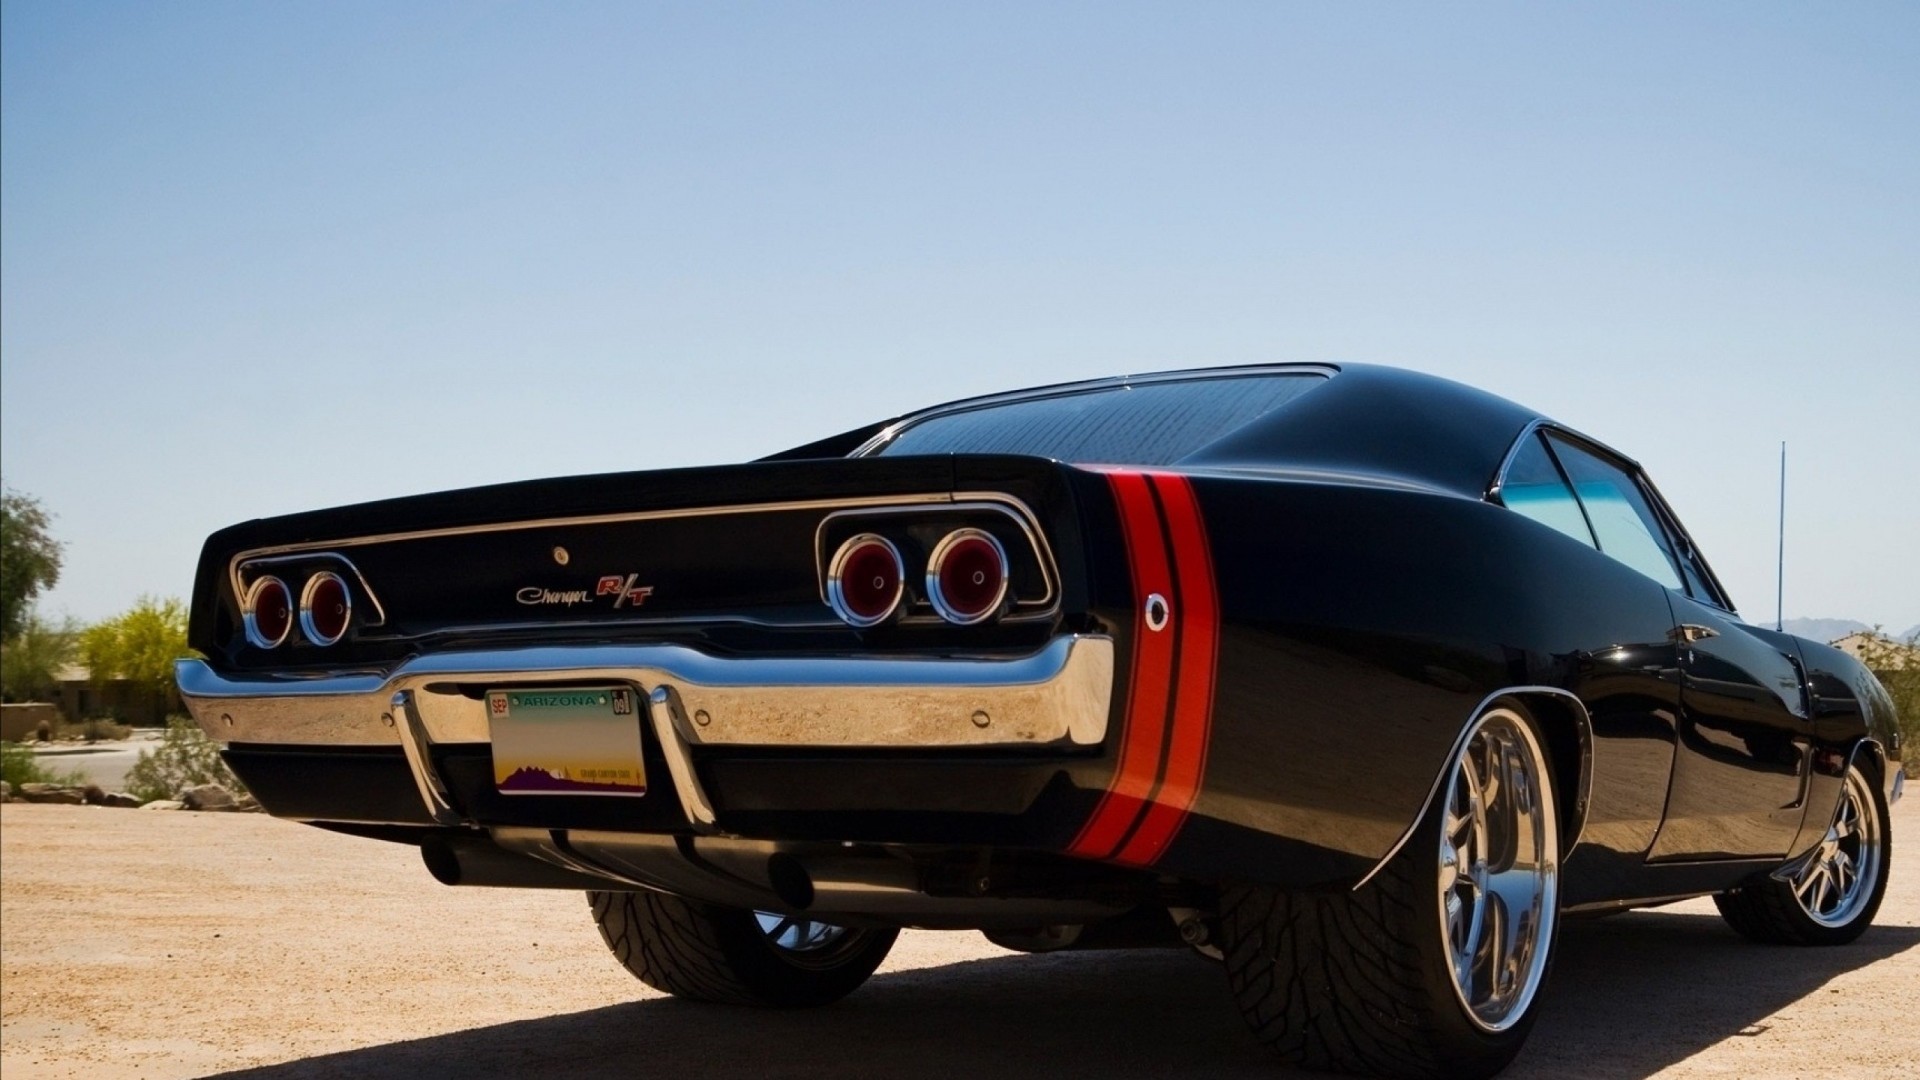 1920x1080  Wallpaper muscle cars, dodge, dodge charger, car, stylish